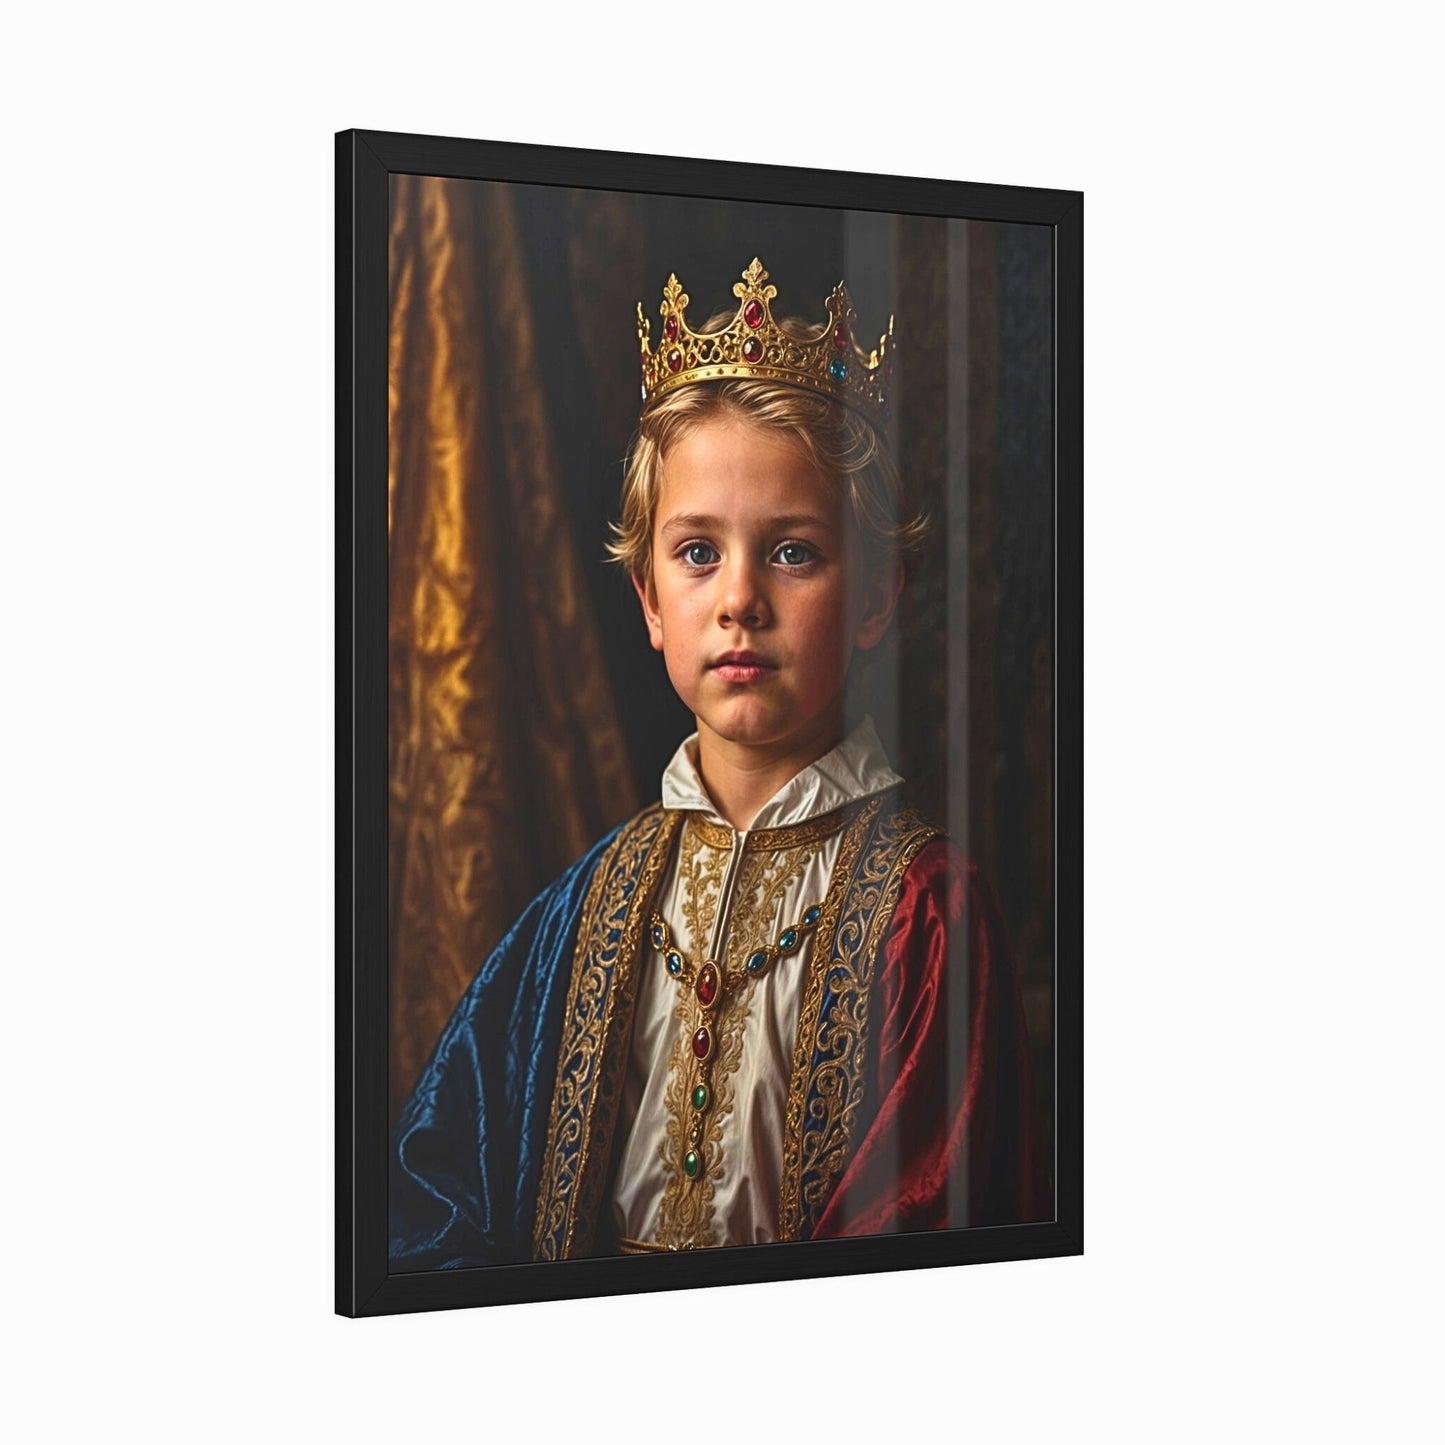 Transform your child's photo into a royal portrait fit for a king or queen. Our custom kids' portraits are perfect for birthdays and special events, blending personalized touches with timeless Renaissance elegance. Ideal for unique gifts and stylish room decor for children.